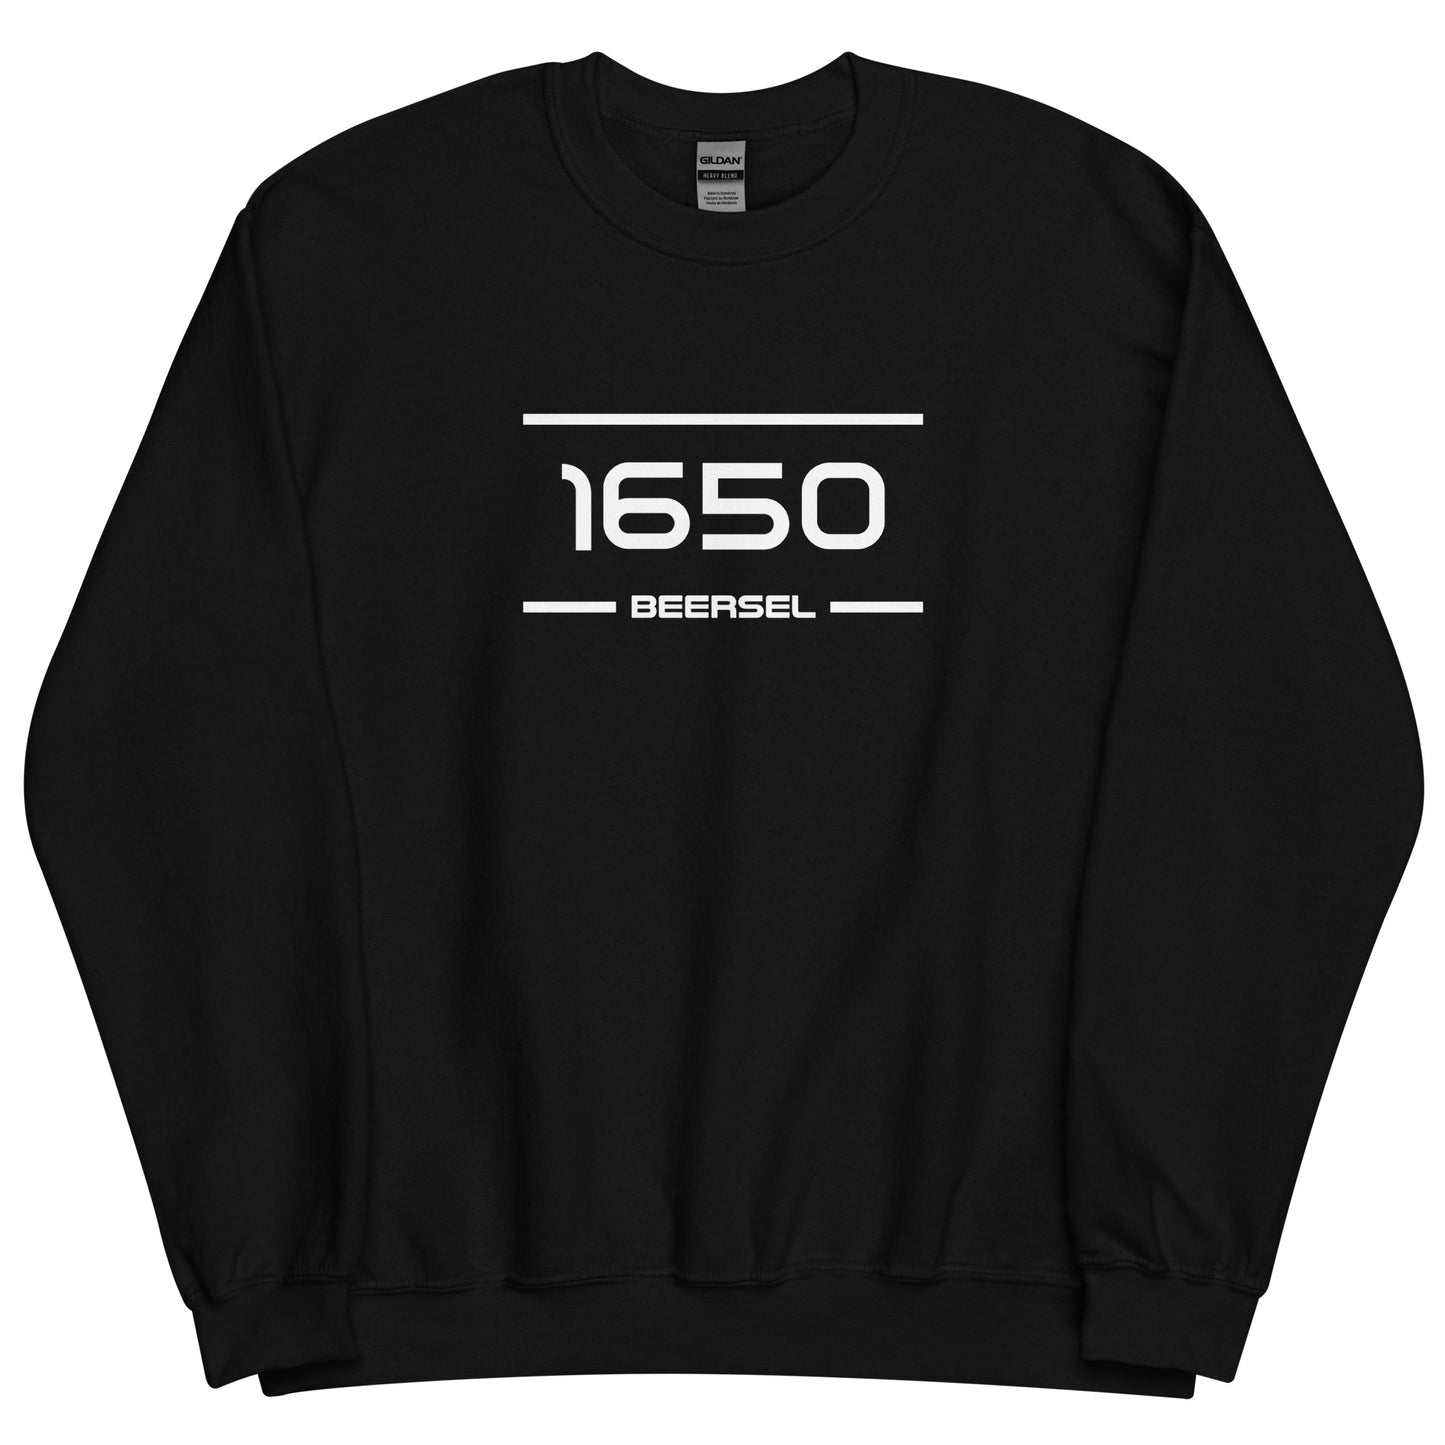 Sweater - 1650 - Beersel (M/V)